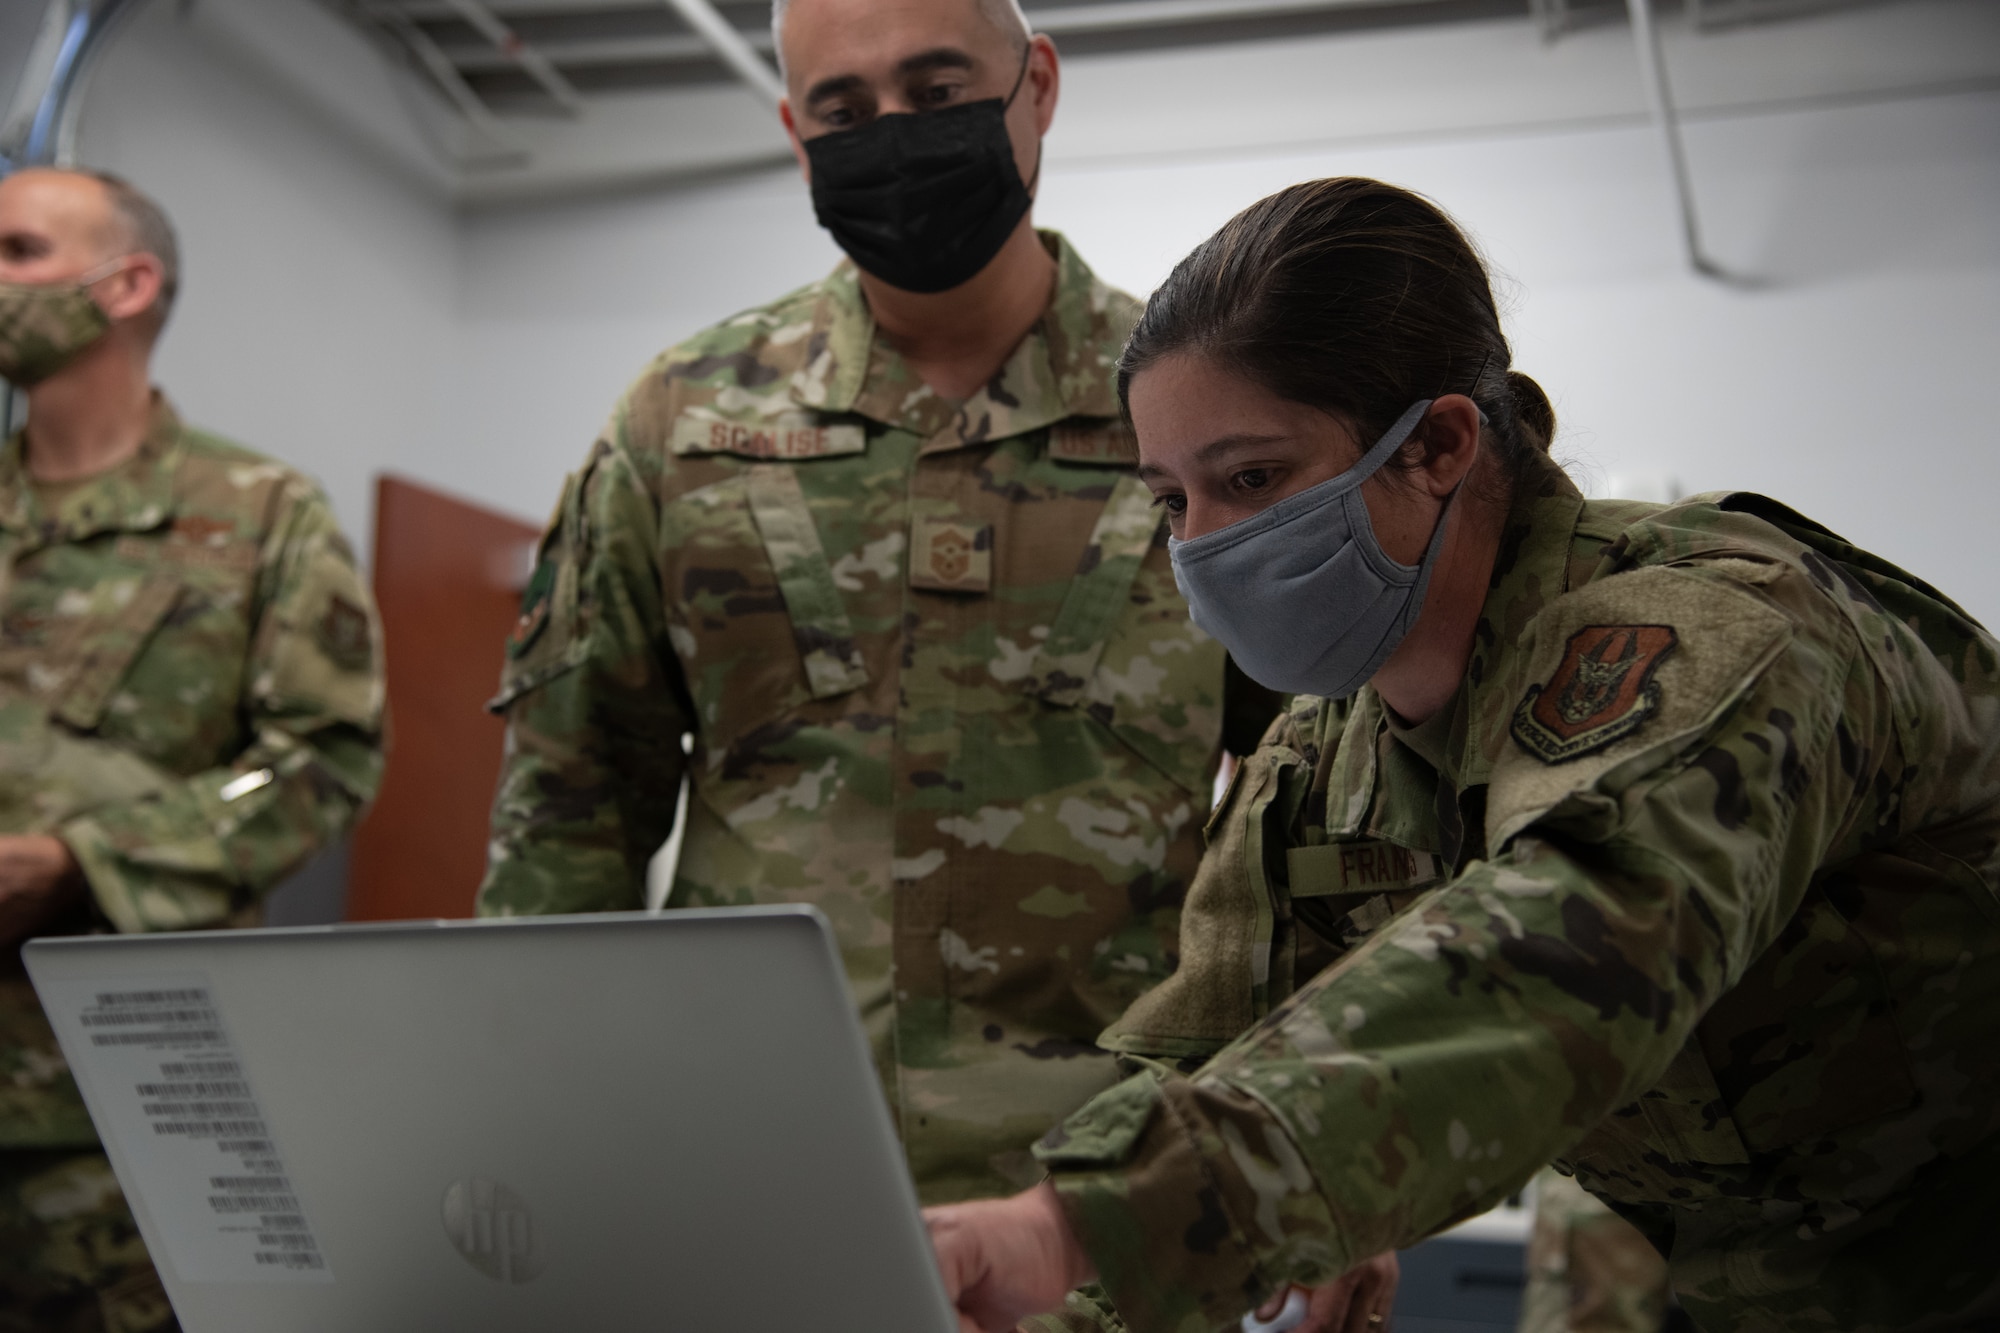 A woman wearing a blue mask points at a laptop screen while a man observes in the background.